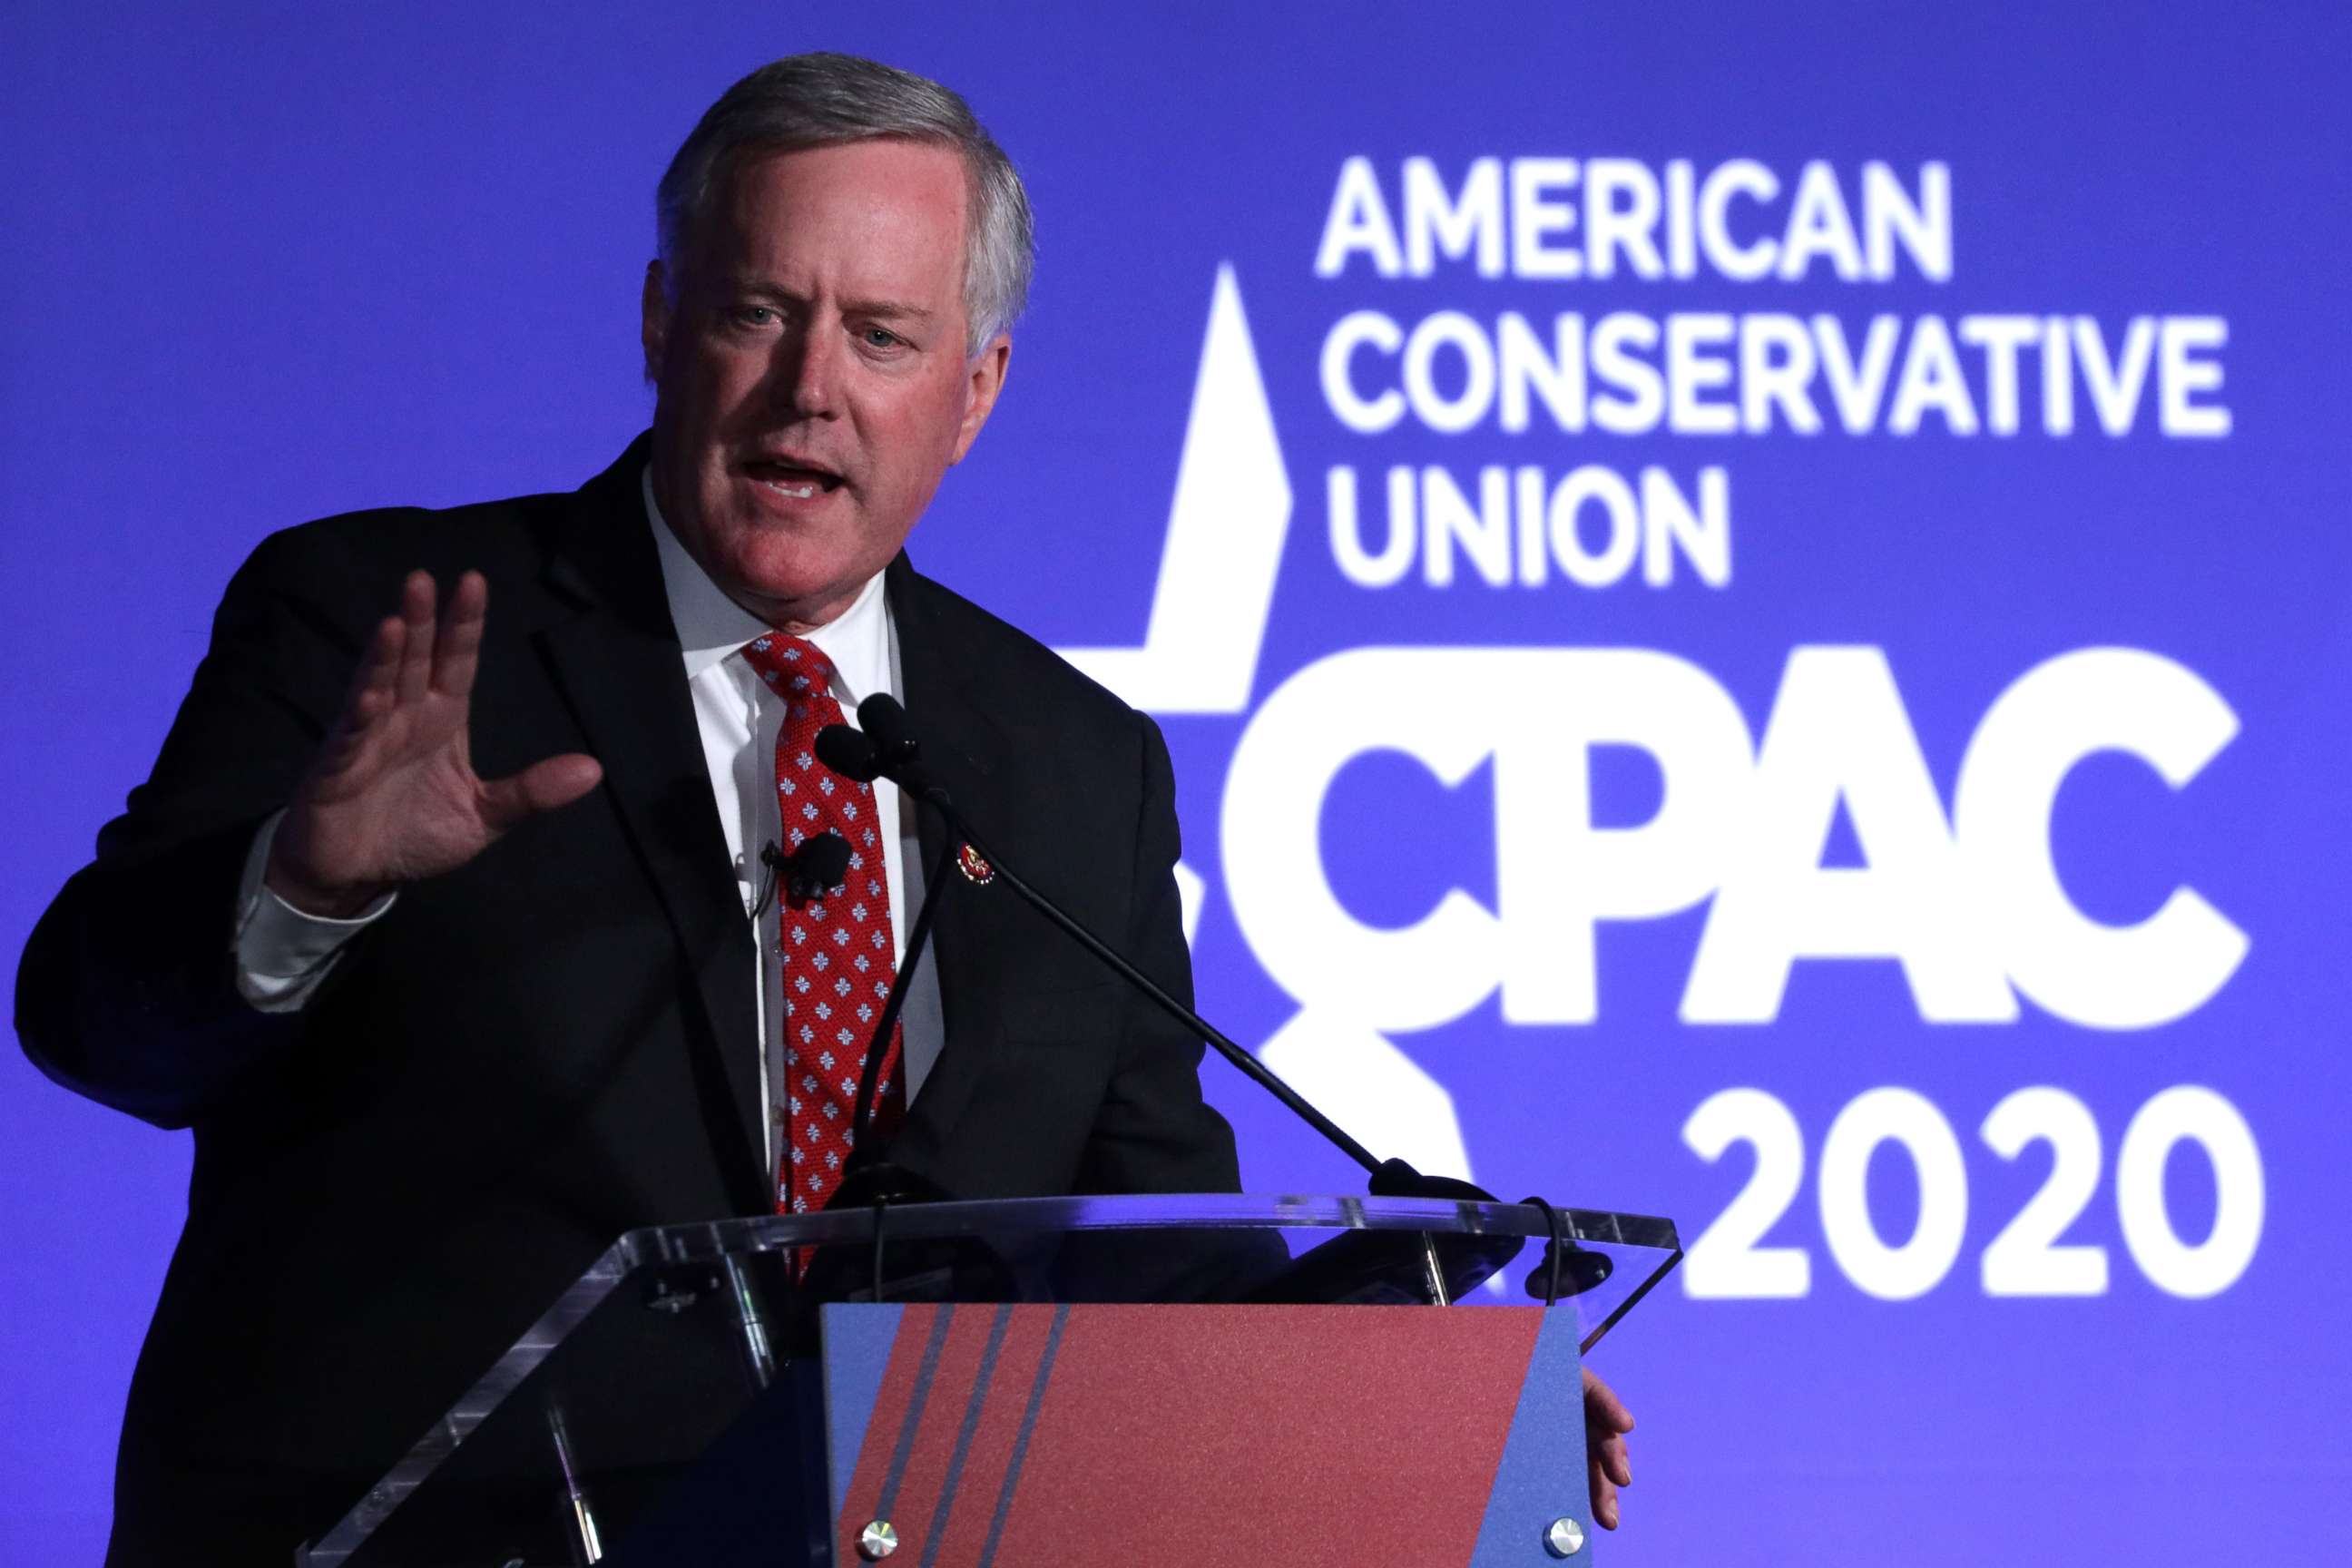 PHOTO: U.S. Rep. Mark Meadows, R-N.C., speaks during the CPAC Direct Action Training at the annual Conservative Political Action Conference at Gaylord National Resort & Convention Center Feb. 26, 2020, in National Harbor, Md.